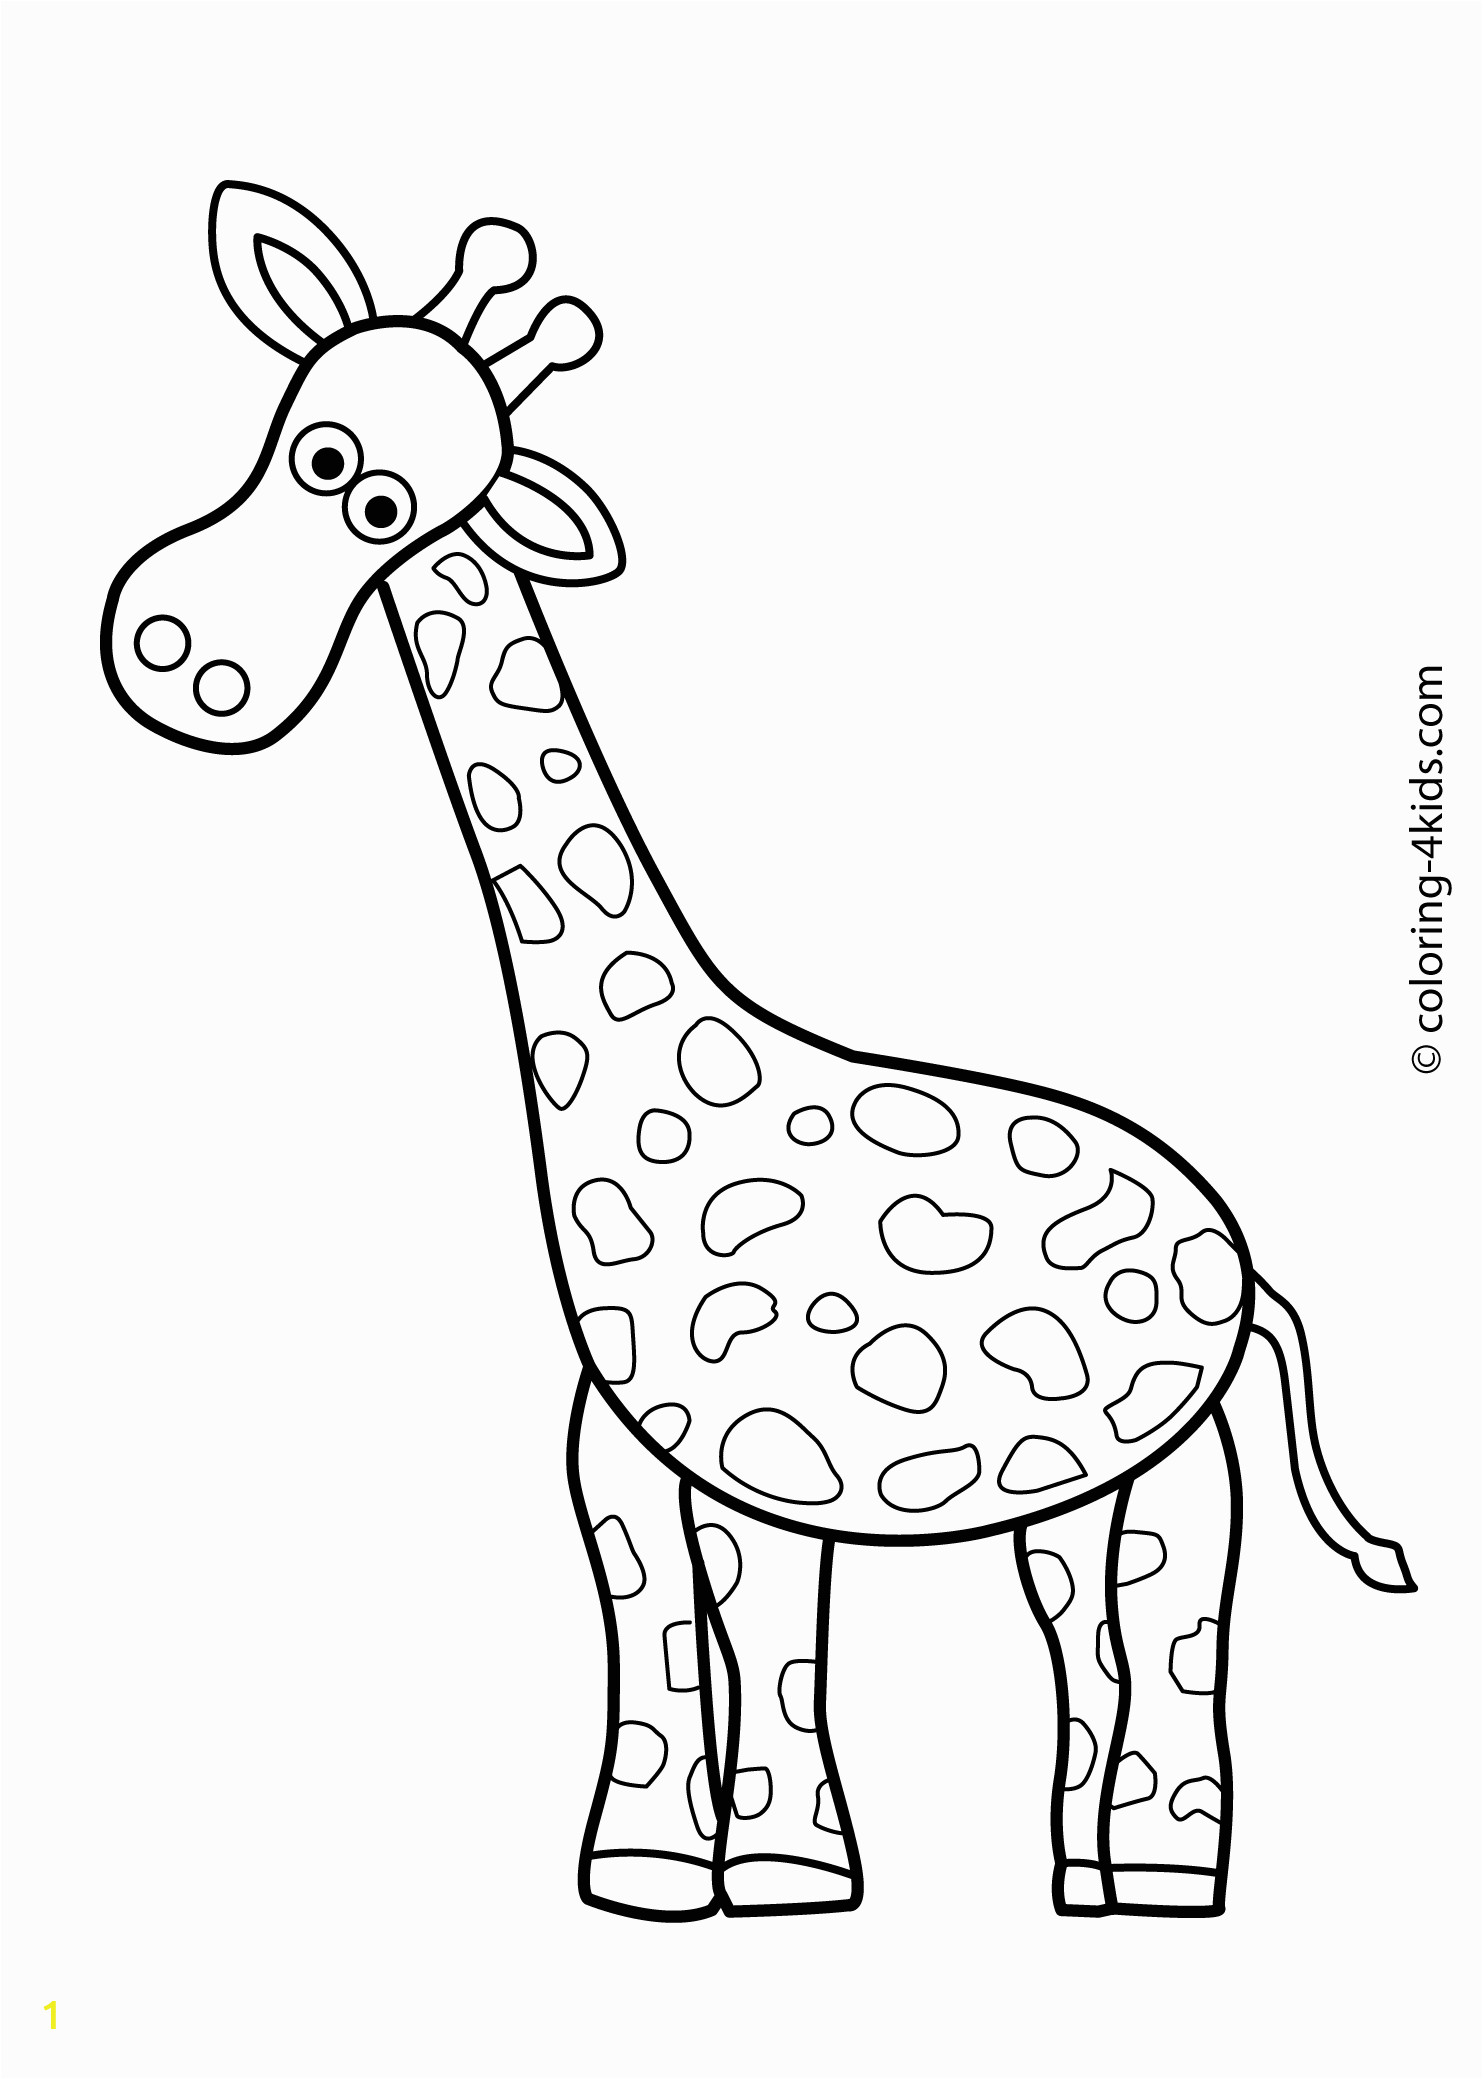 Printable Zoo Animals Coloring Pages Animals Coloring Pages for Kids Giraffe Coloring Pages for